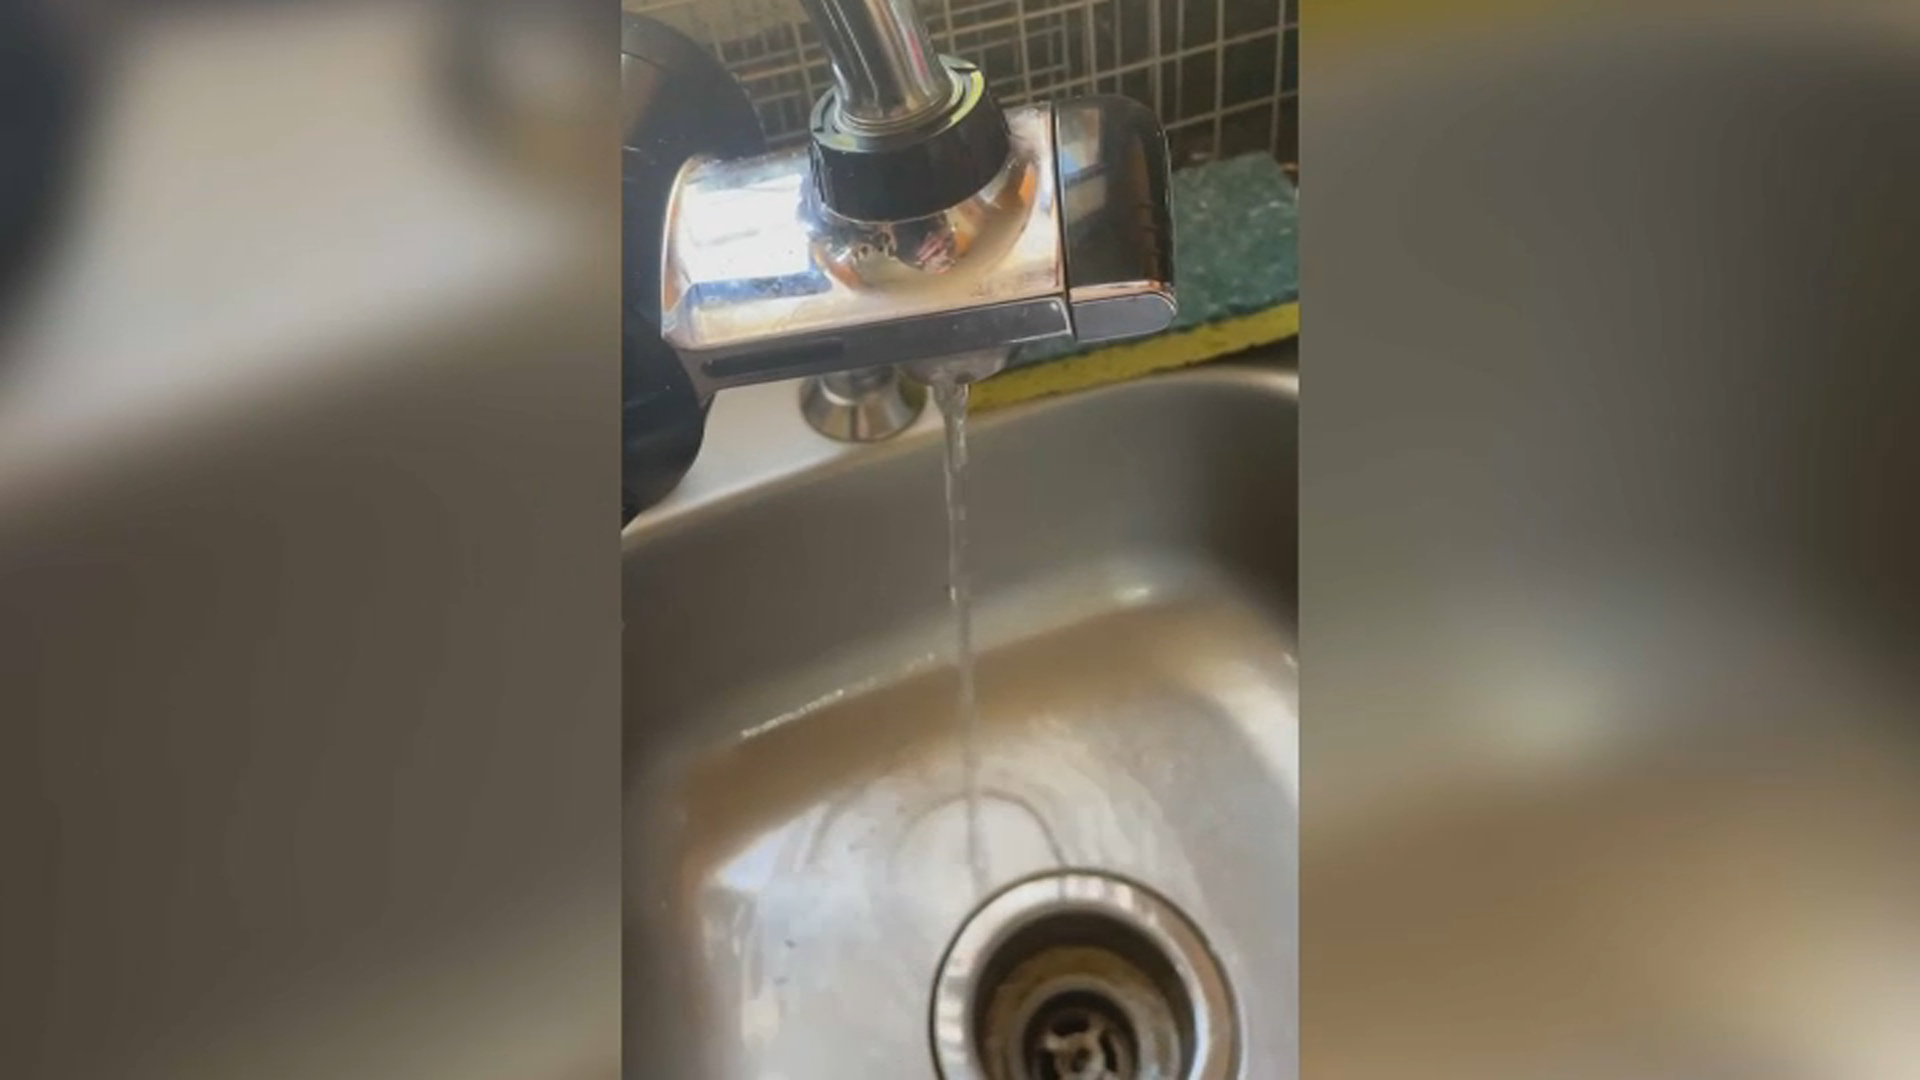 Water Service Restored in Dixmoor, Pressure Issues Remain